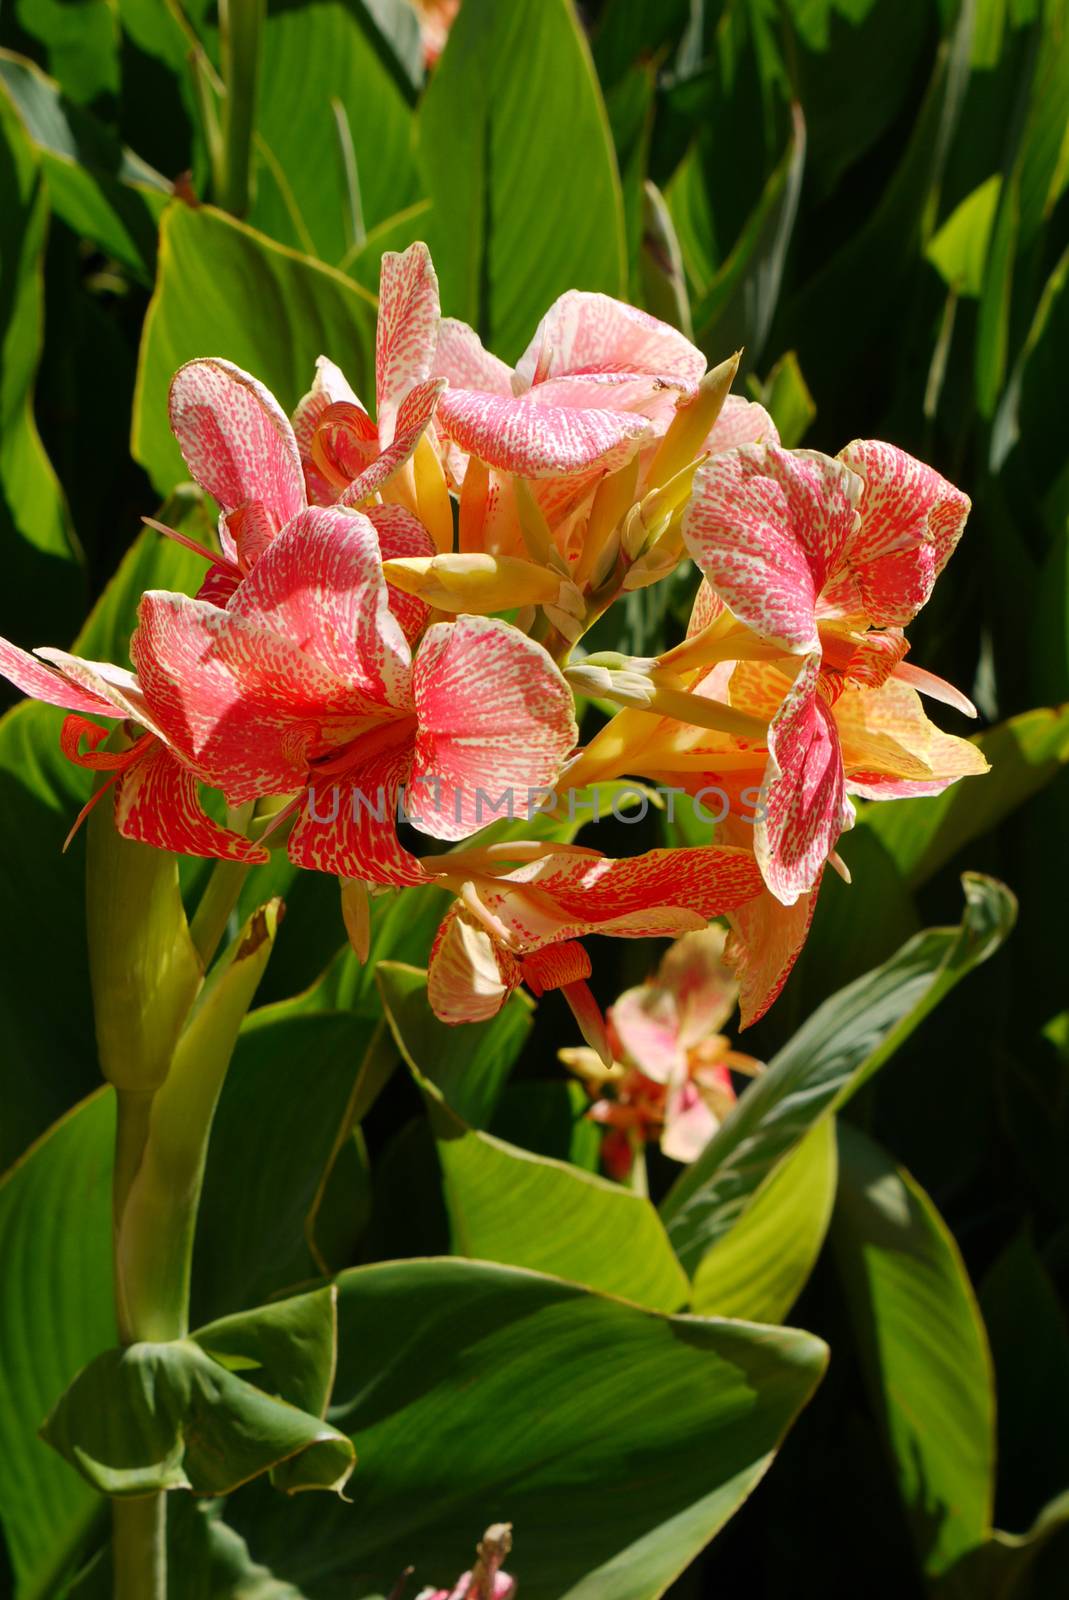 Flower of a beautiful pink orchid with large petals and green leaves